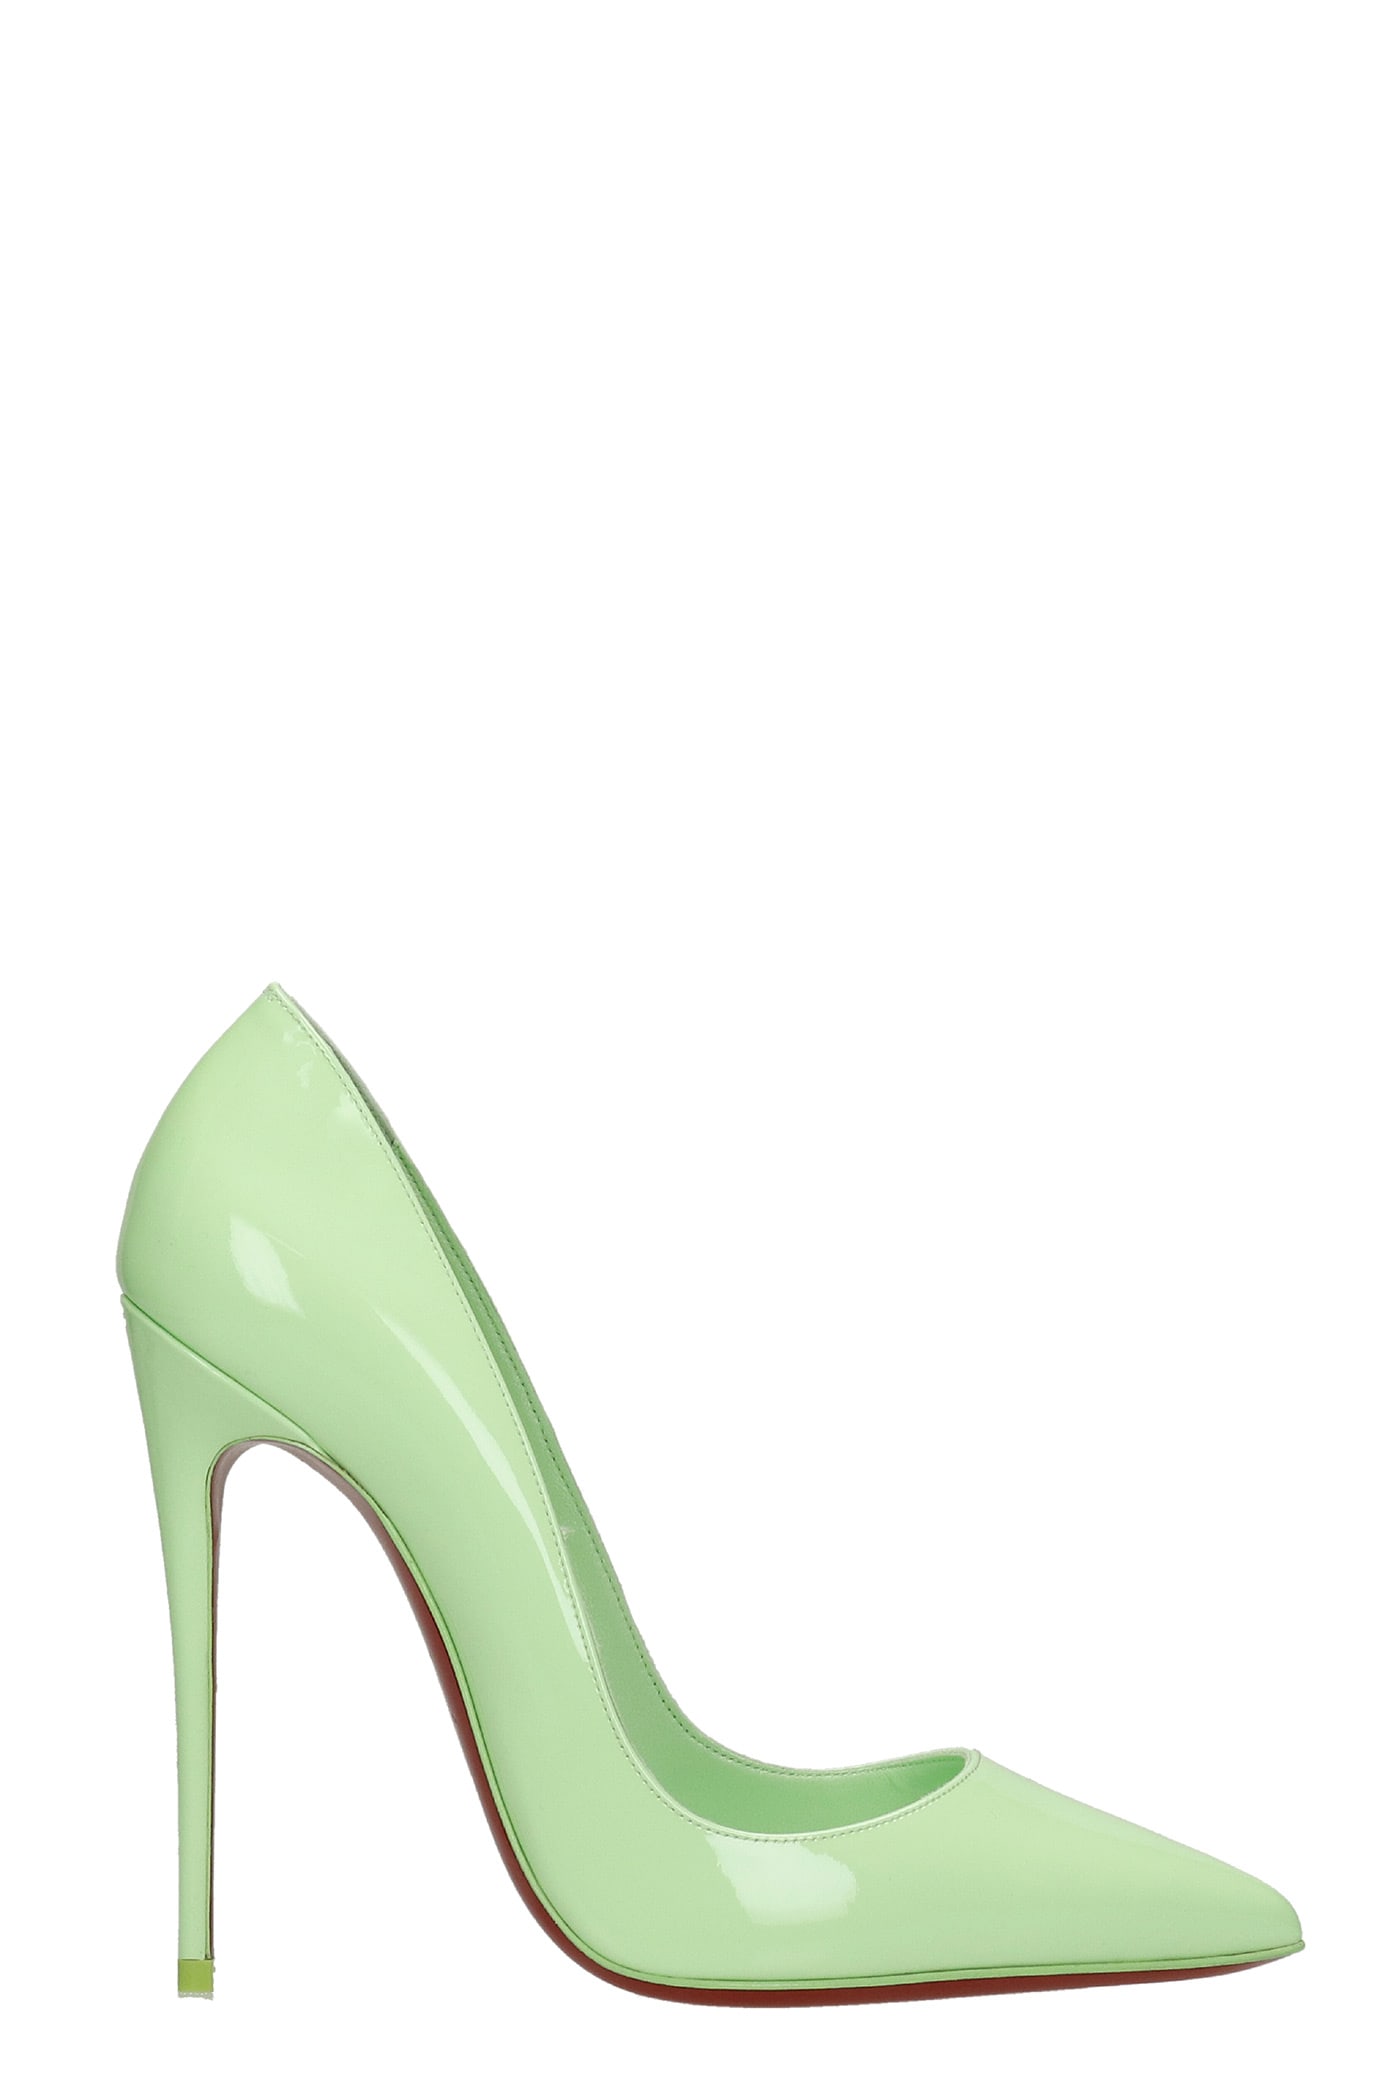 CHRISTIAN LOUBOUTIN SO KATE PUMPS IN GREEN LEATHER,3210824E454